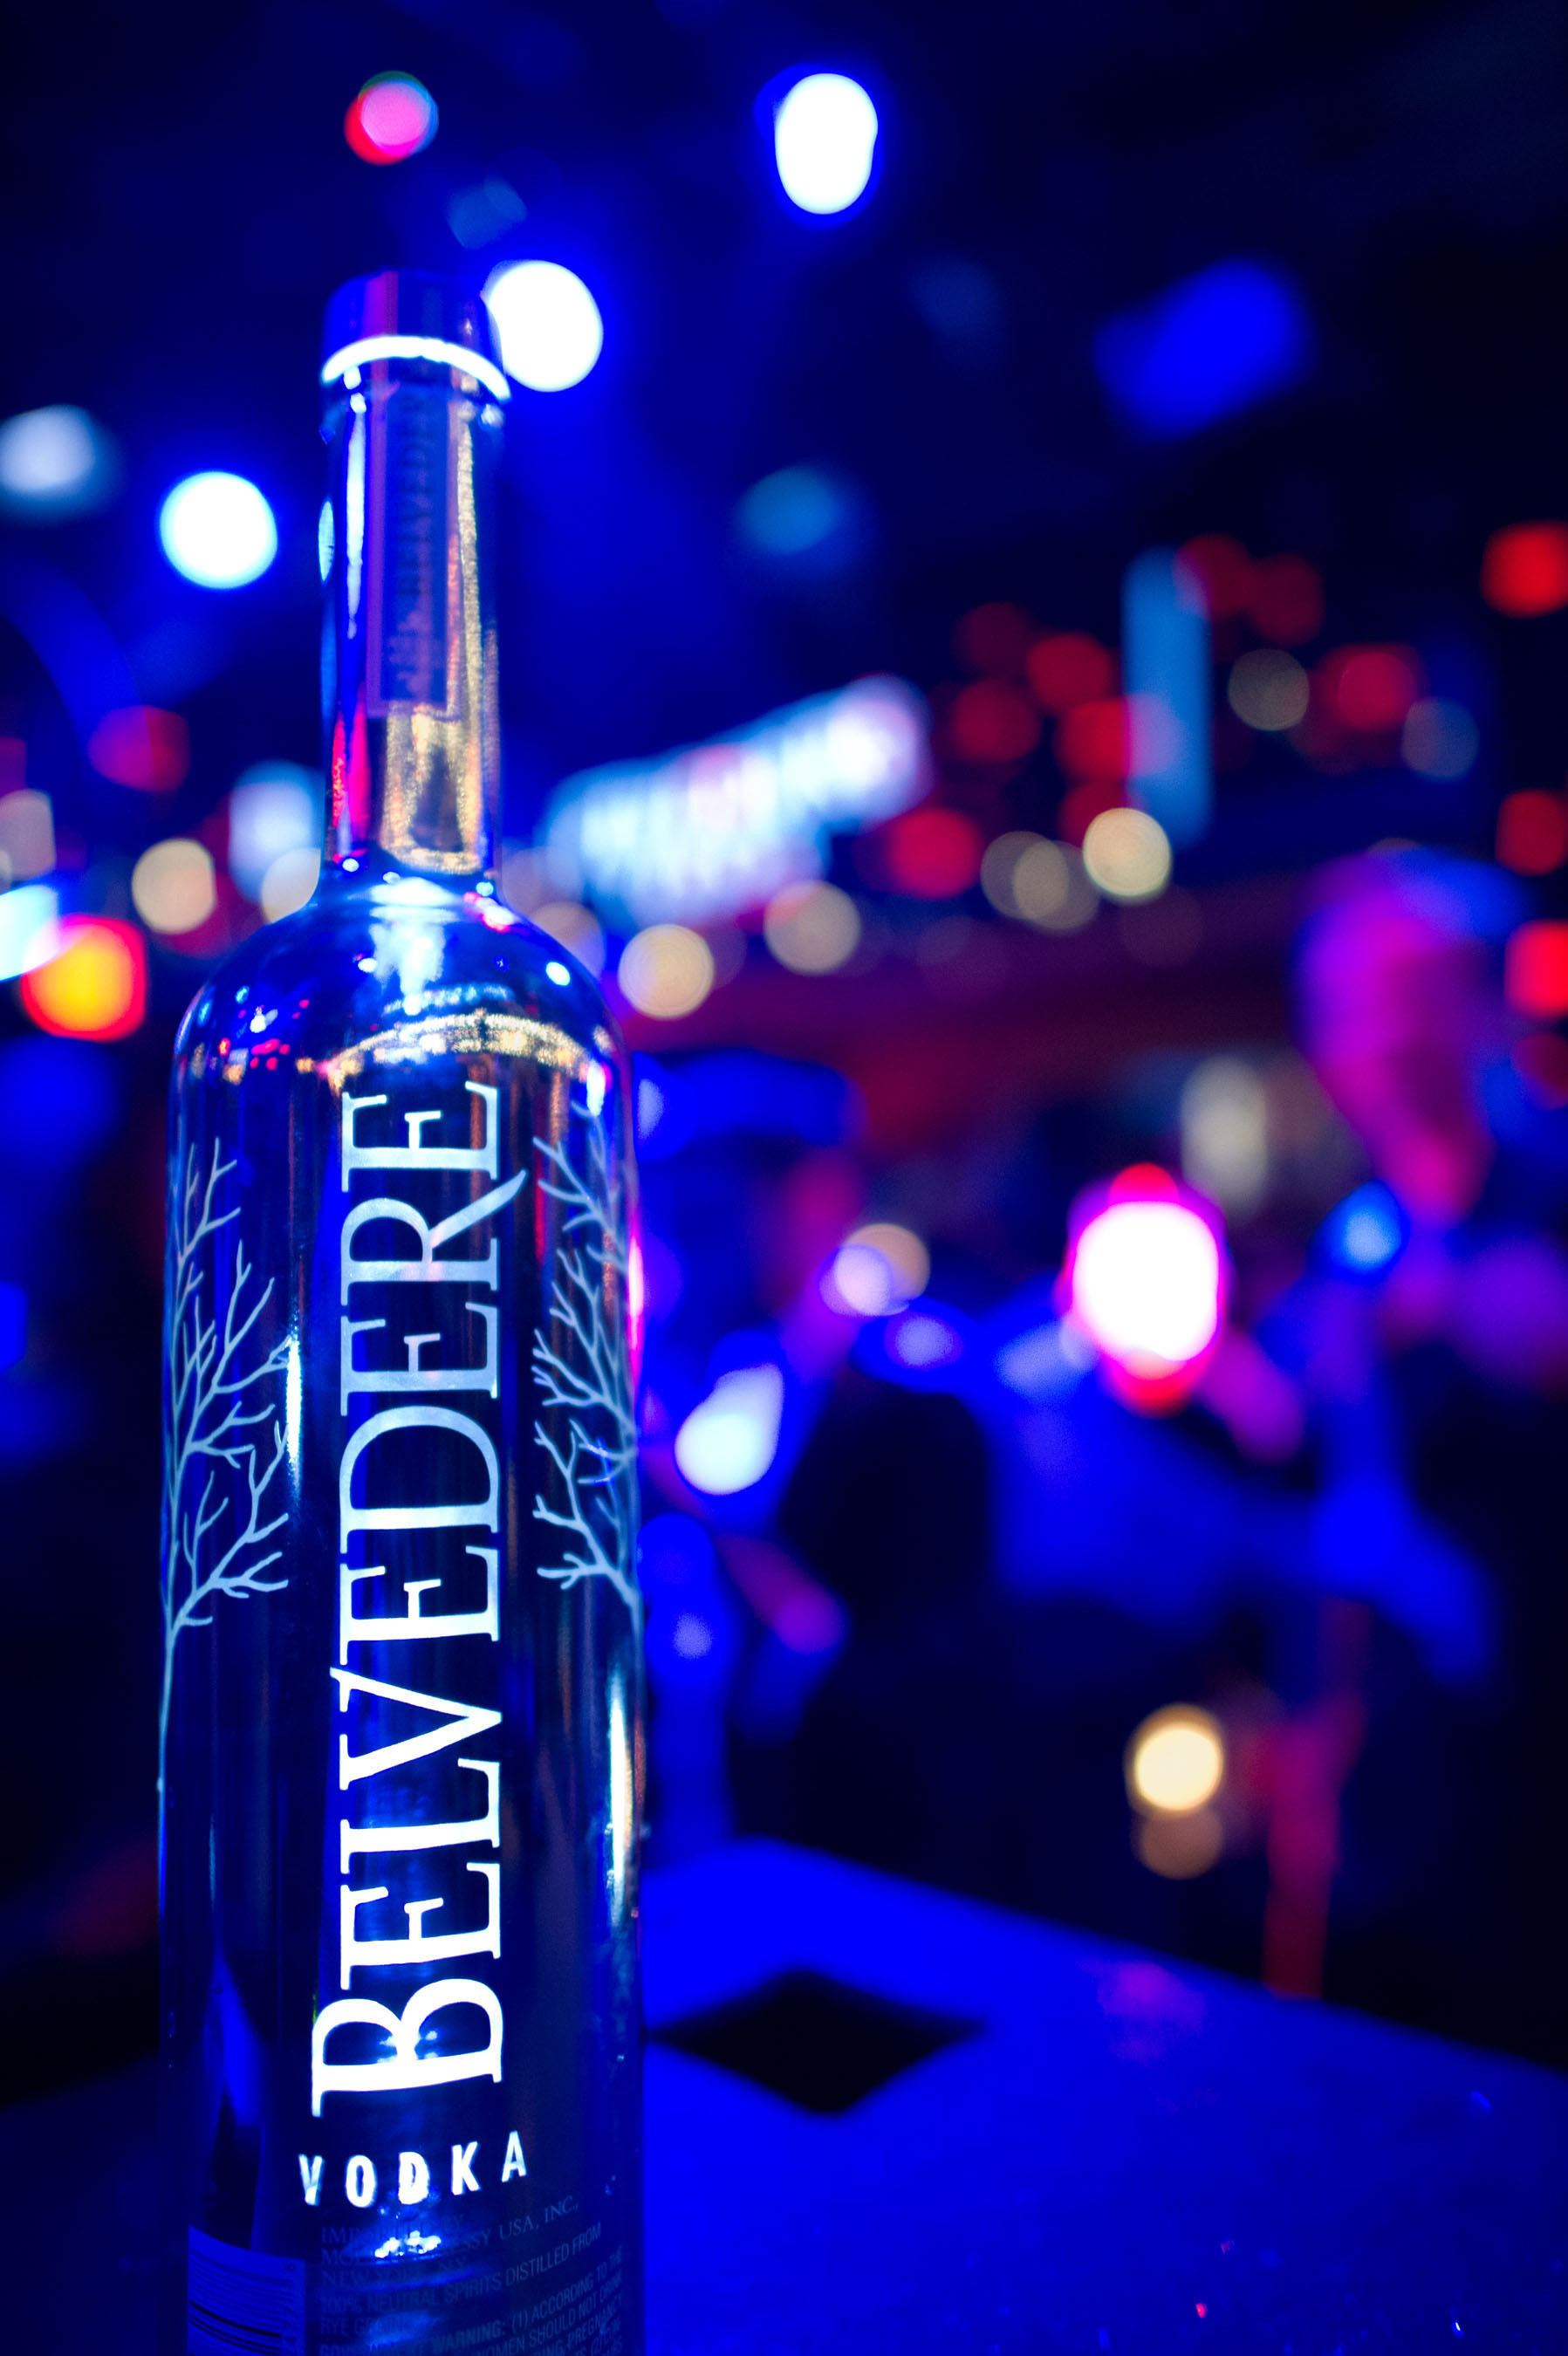 Where to buy Belvedere Vodka Silver Bottle Limited Edition, Poland